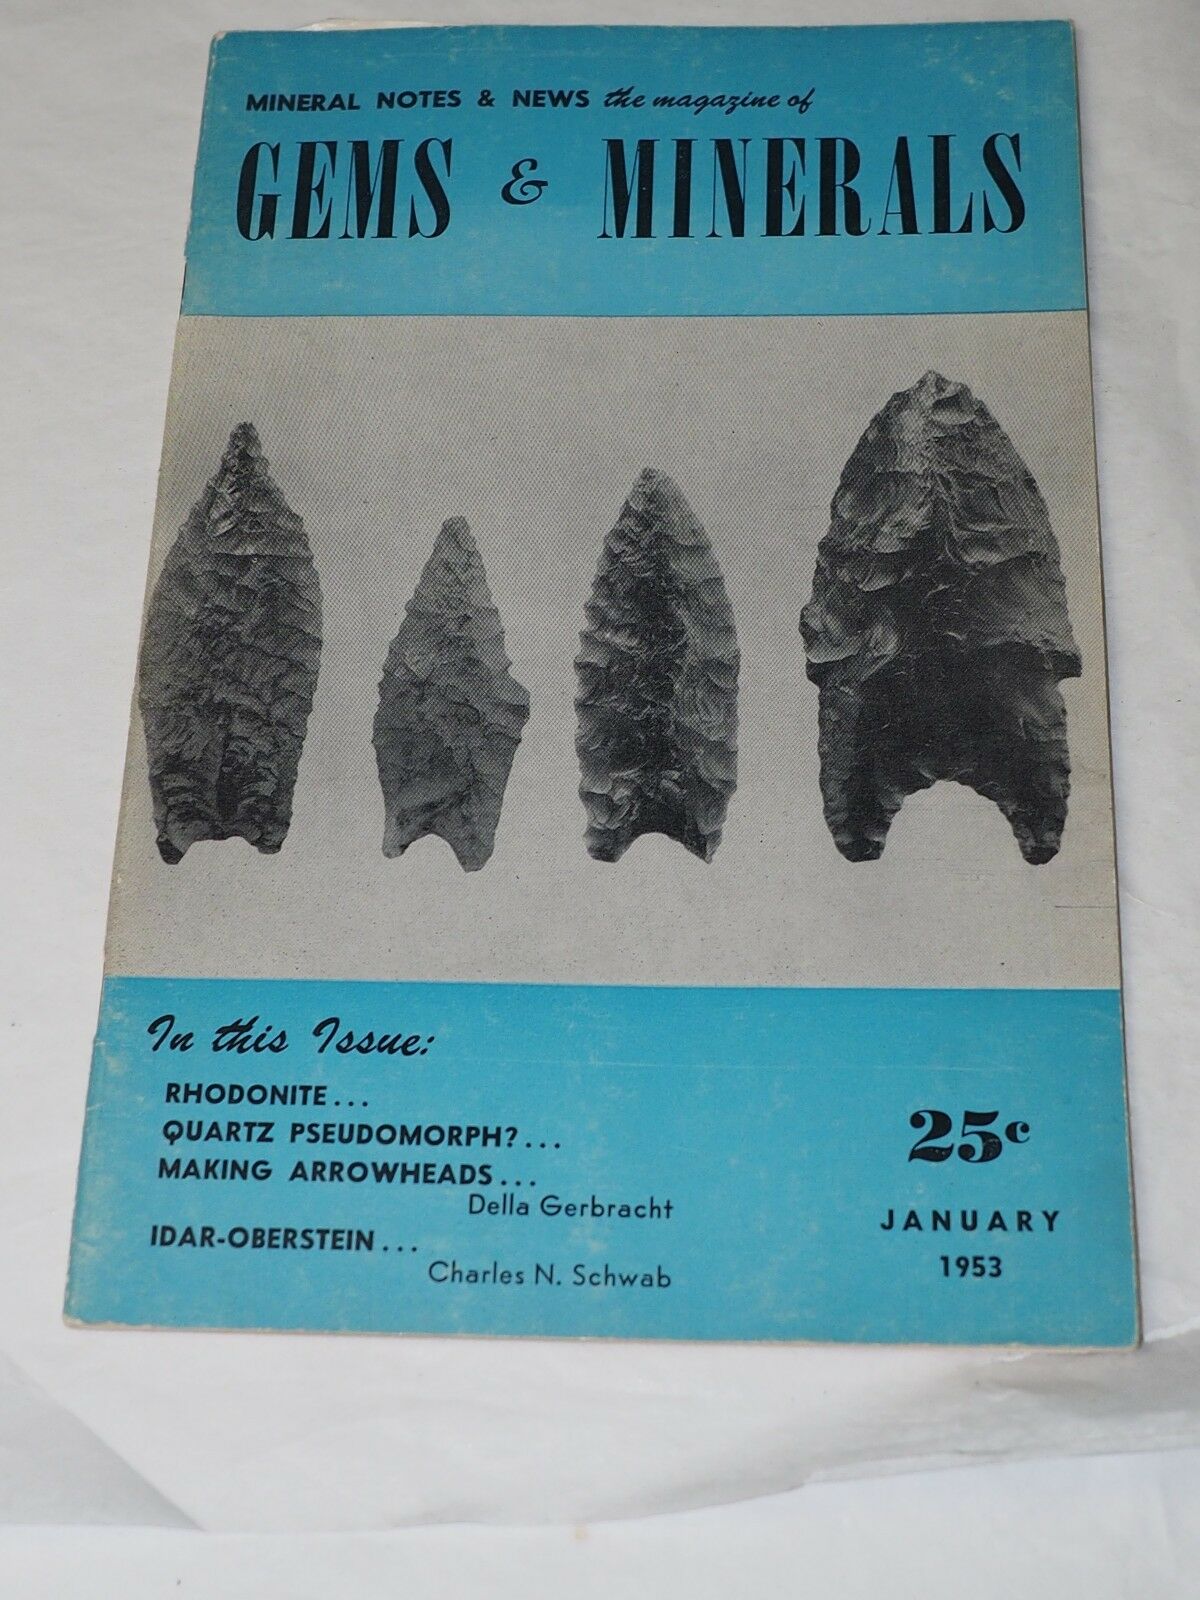 Mineral Notes & News Gems & Minerals January 1953